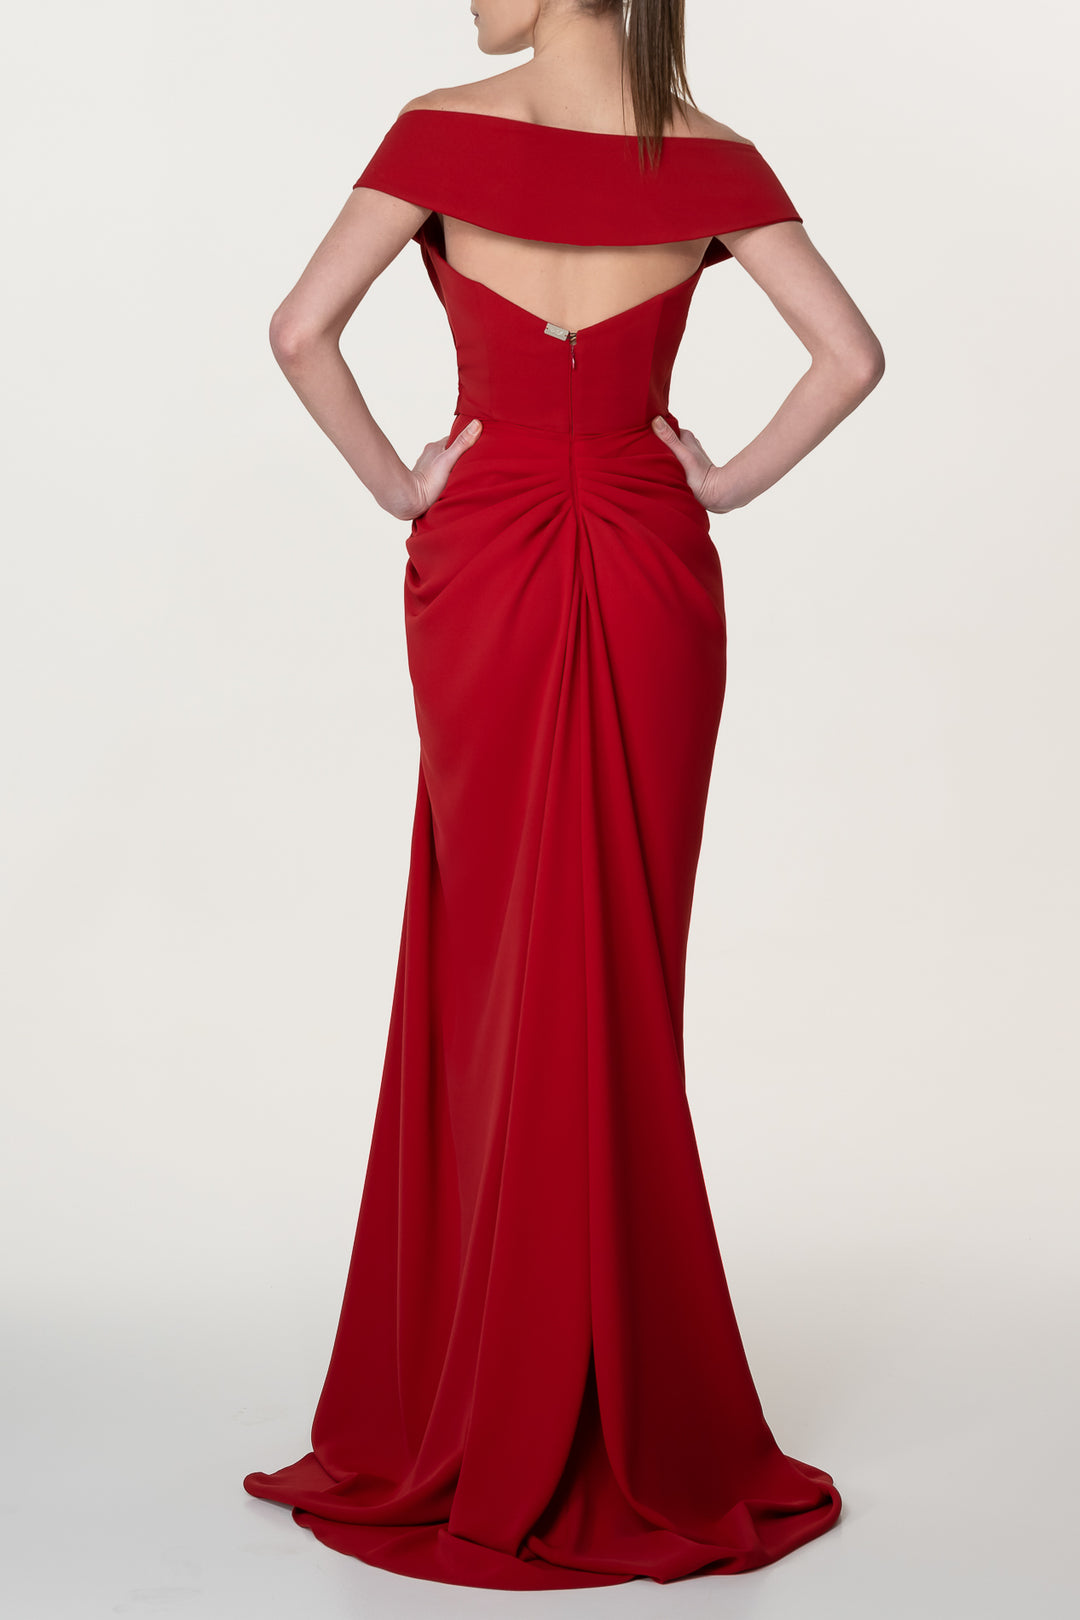 Athena Ruby Red Crepe Dress